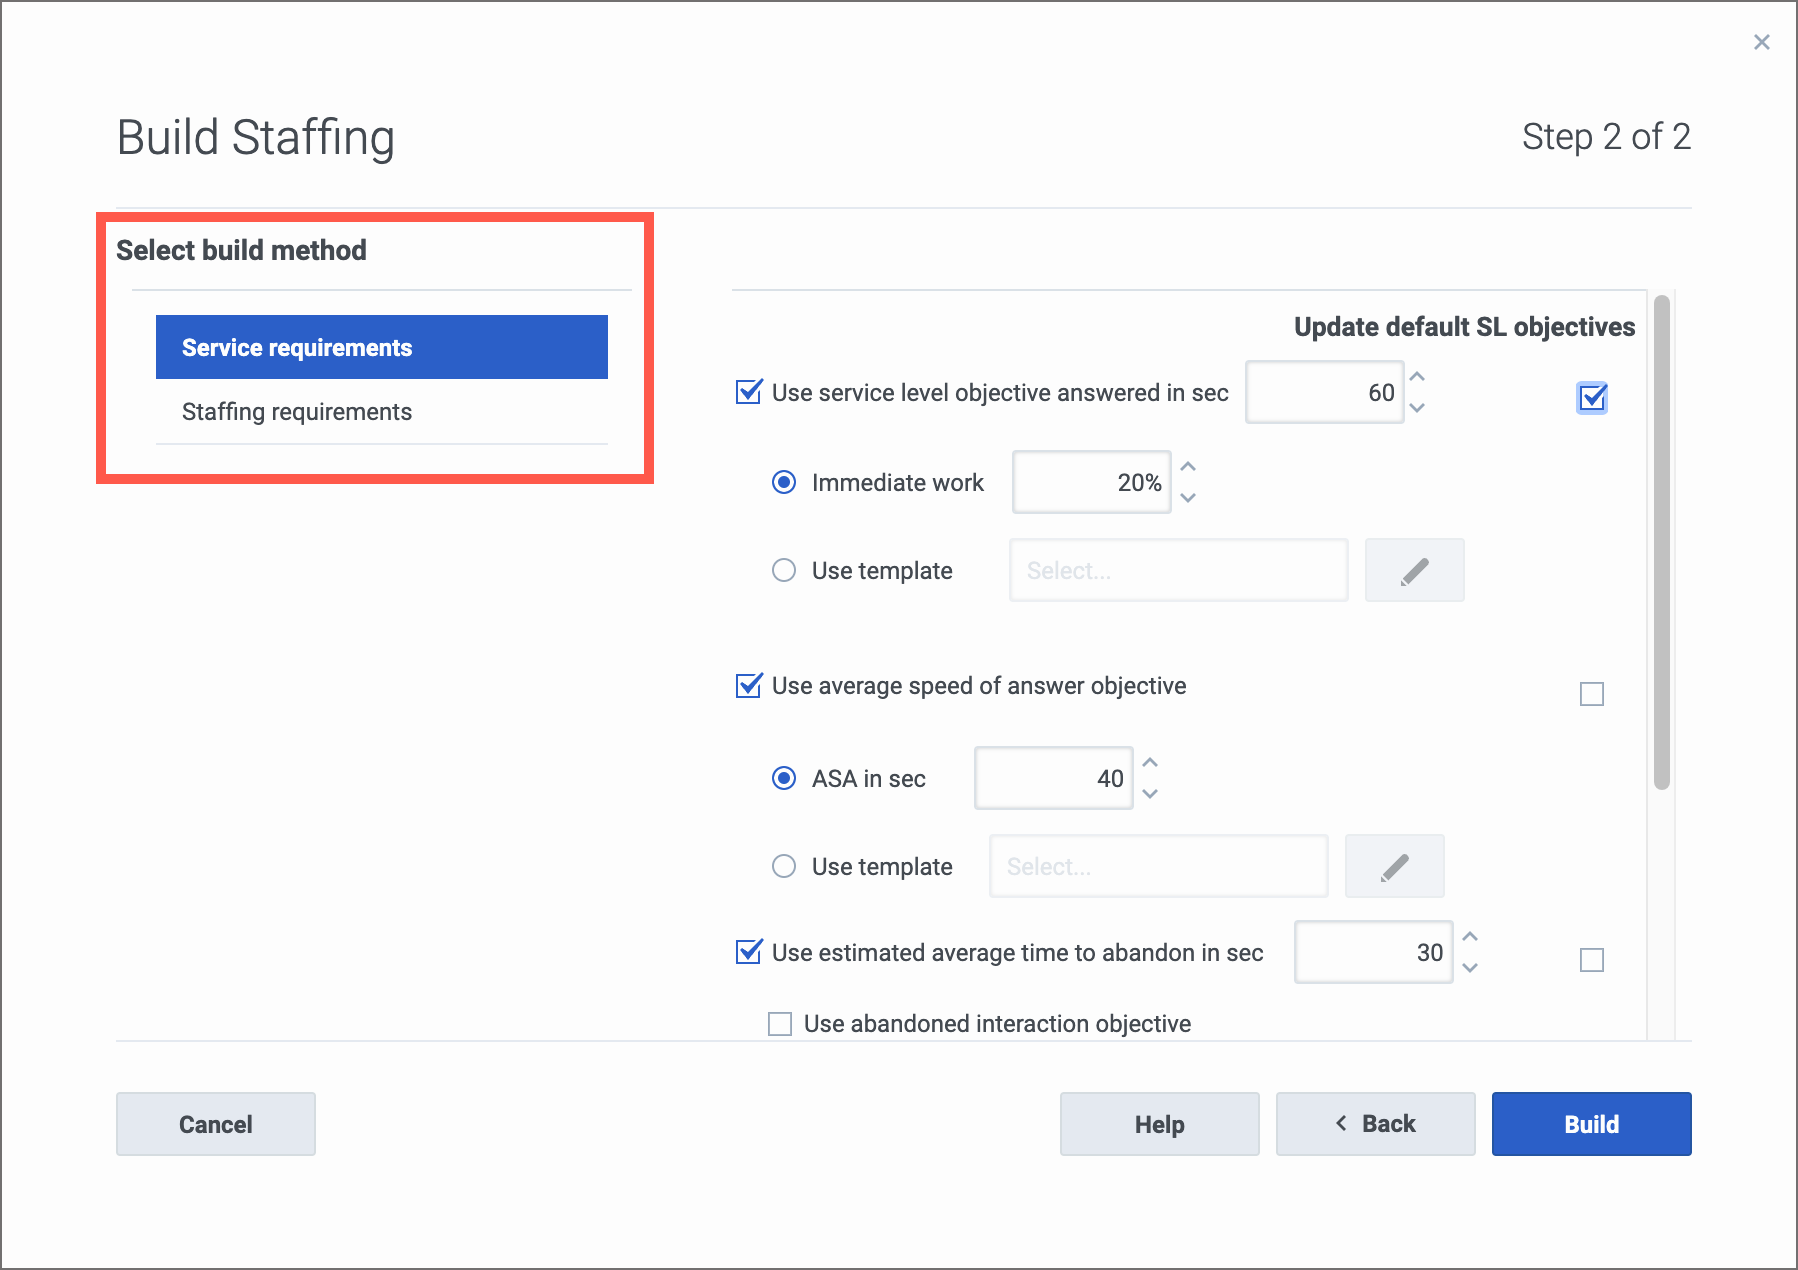 Step 2 of the Build Staffing wizard. Select a build method.